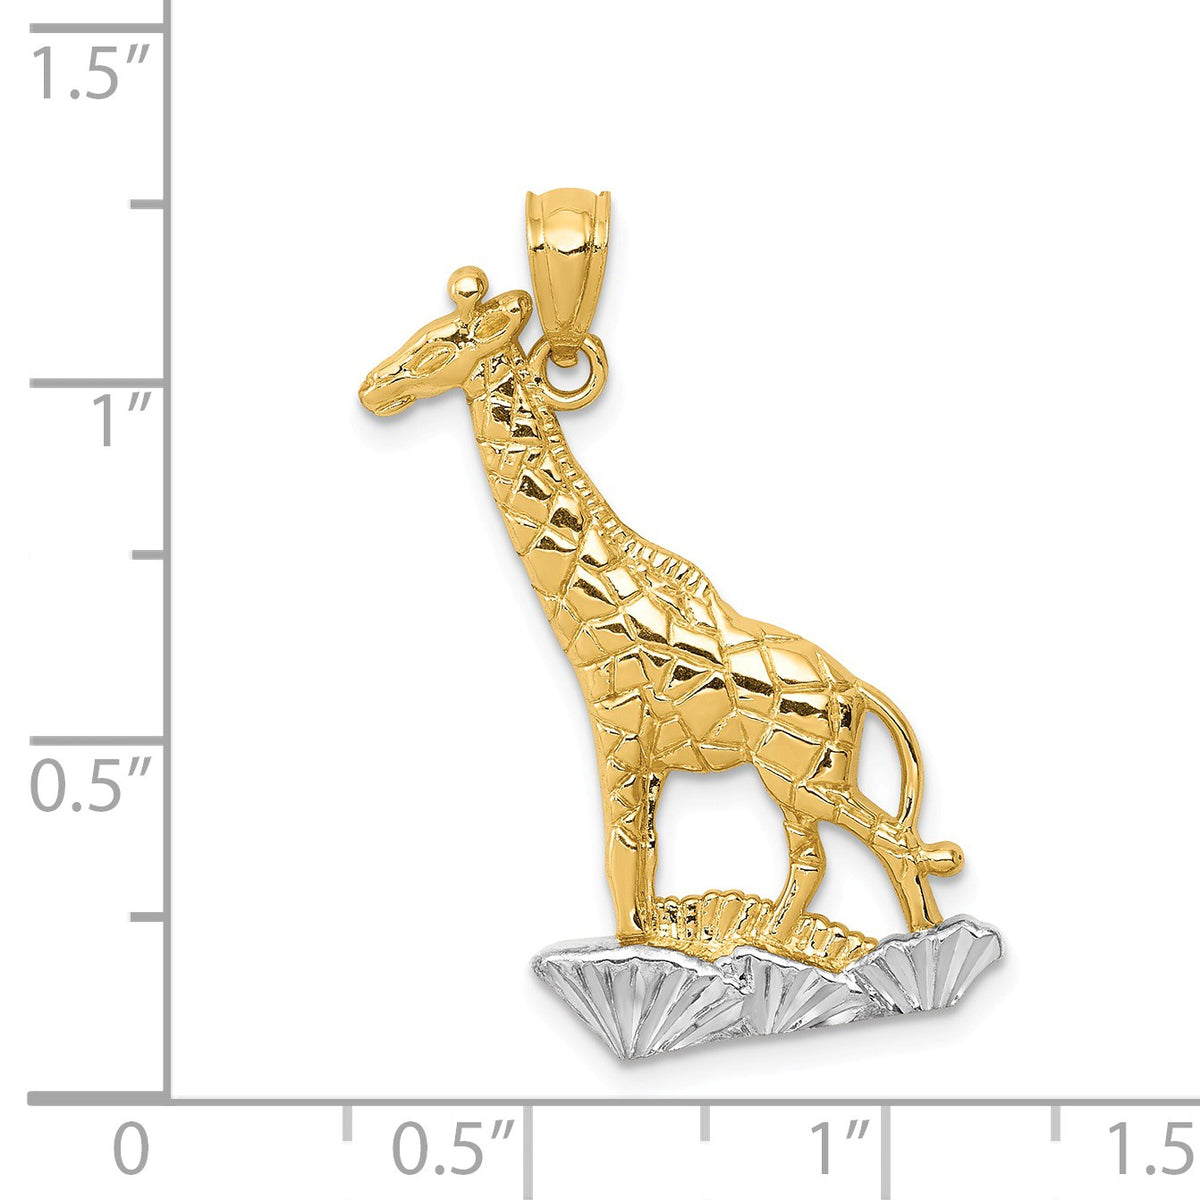 Alternate view of the 14K Yellow Gold and White Rhodium 2D Giraffe Pendant, 15 x 29mm by The Black Bow Jewelry Co.